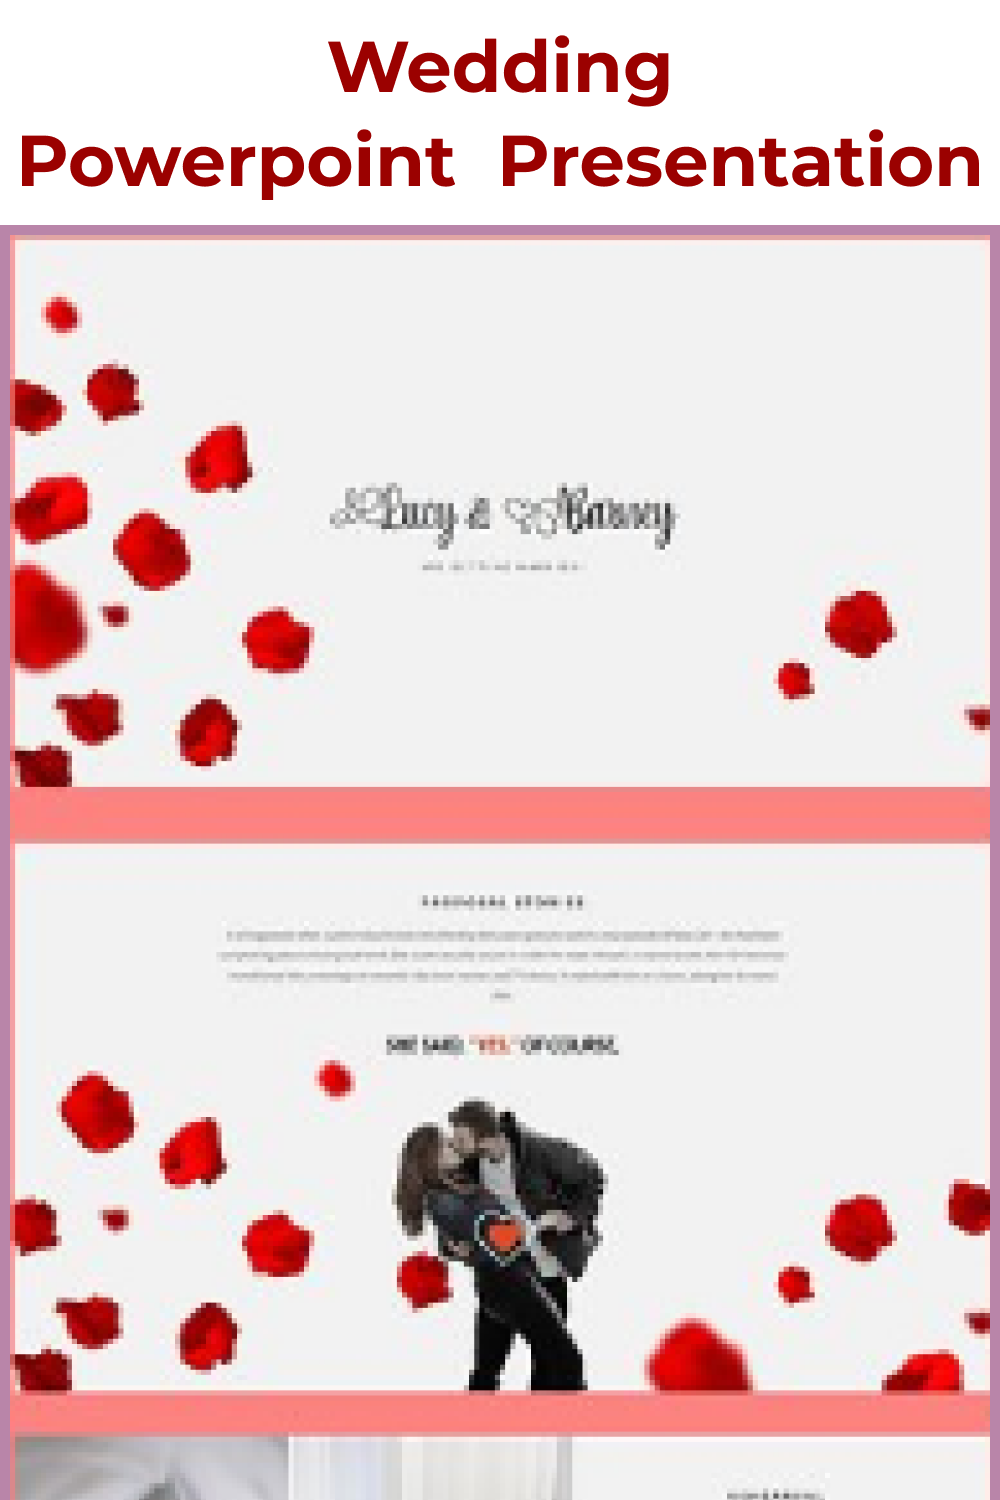 You can mix and match these powerpoint slides to match your wedding themes and also stunning Video Slides.